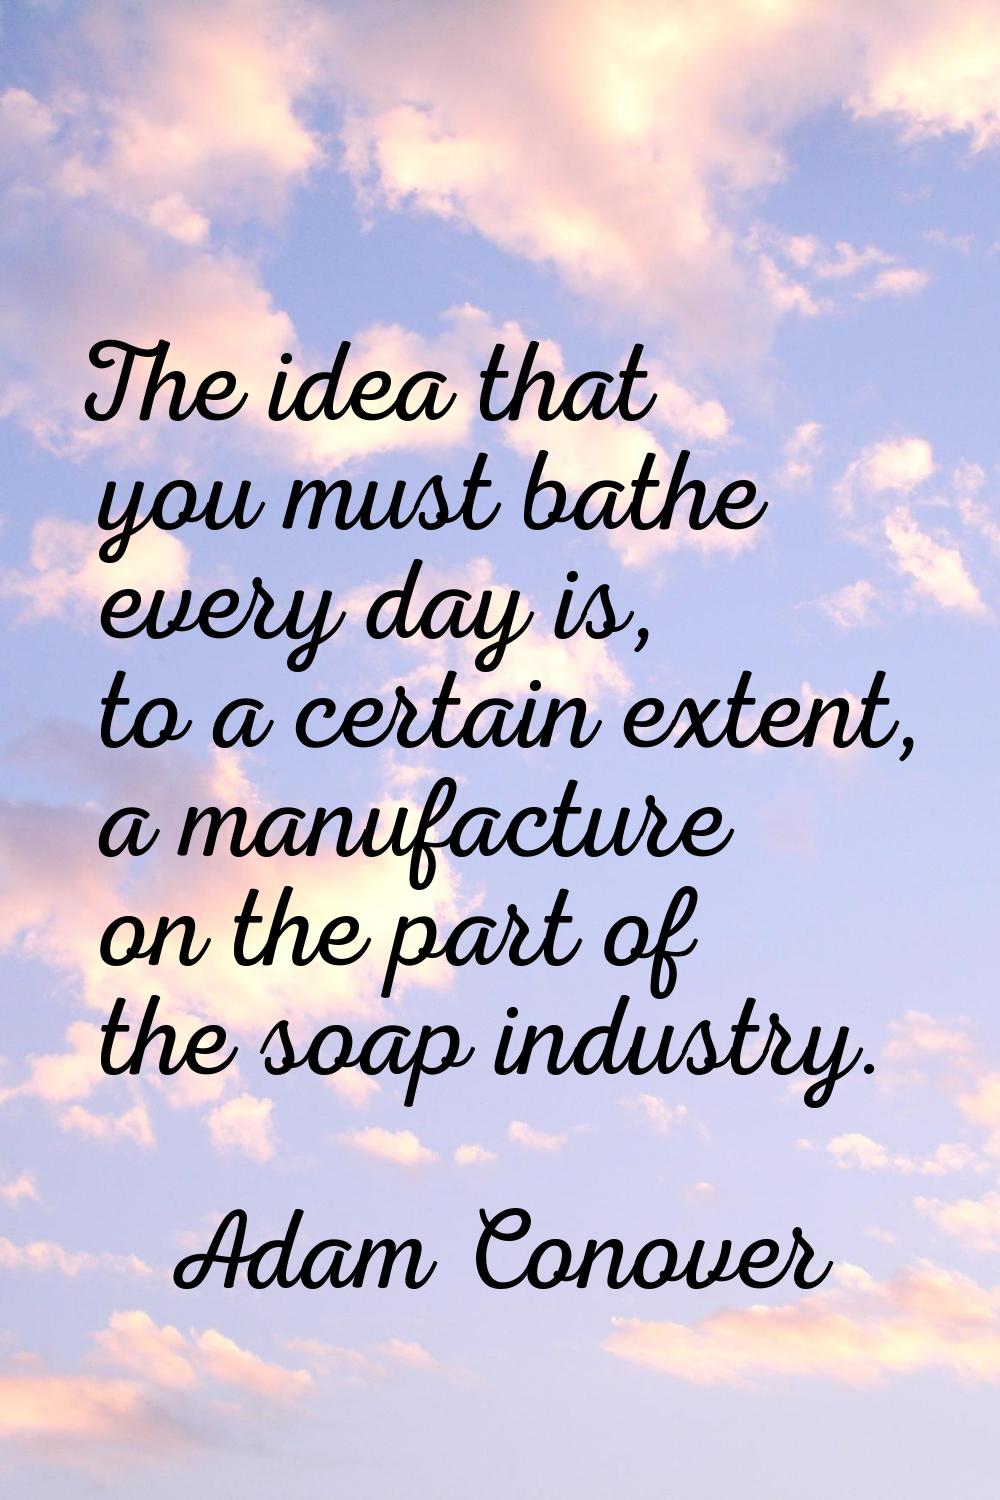 The idea that you must bathe every day is, to a certain extent, a manufacture on the part of the so